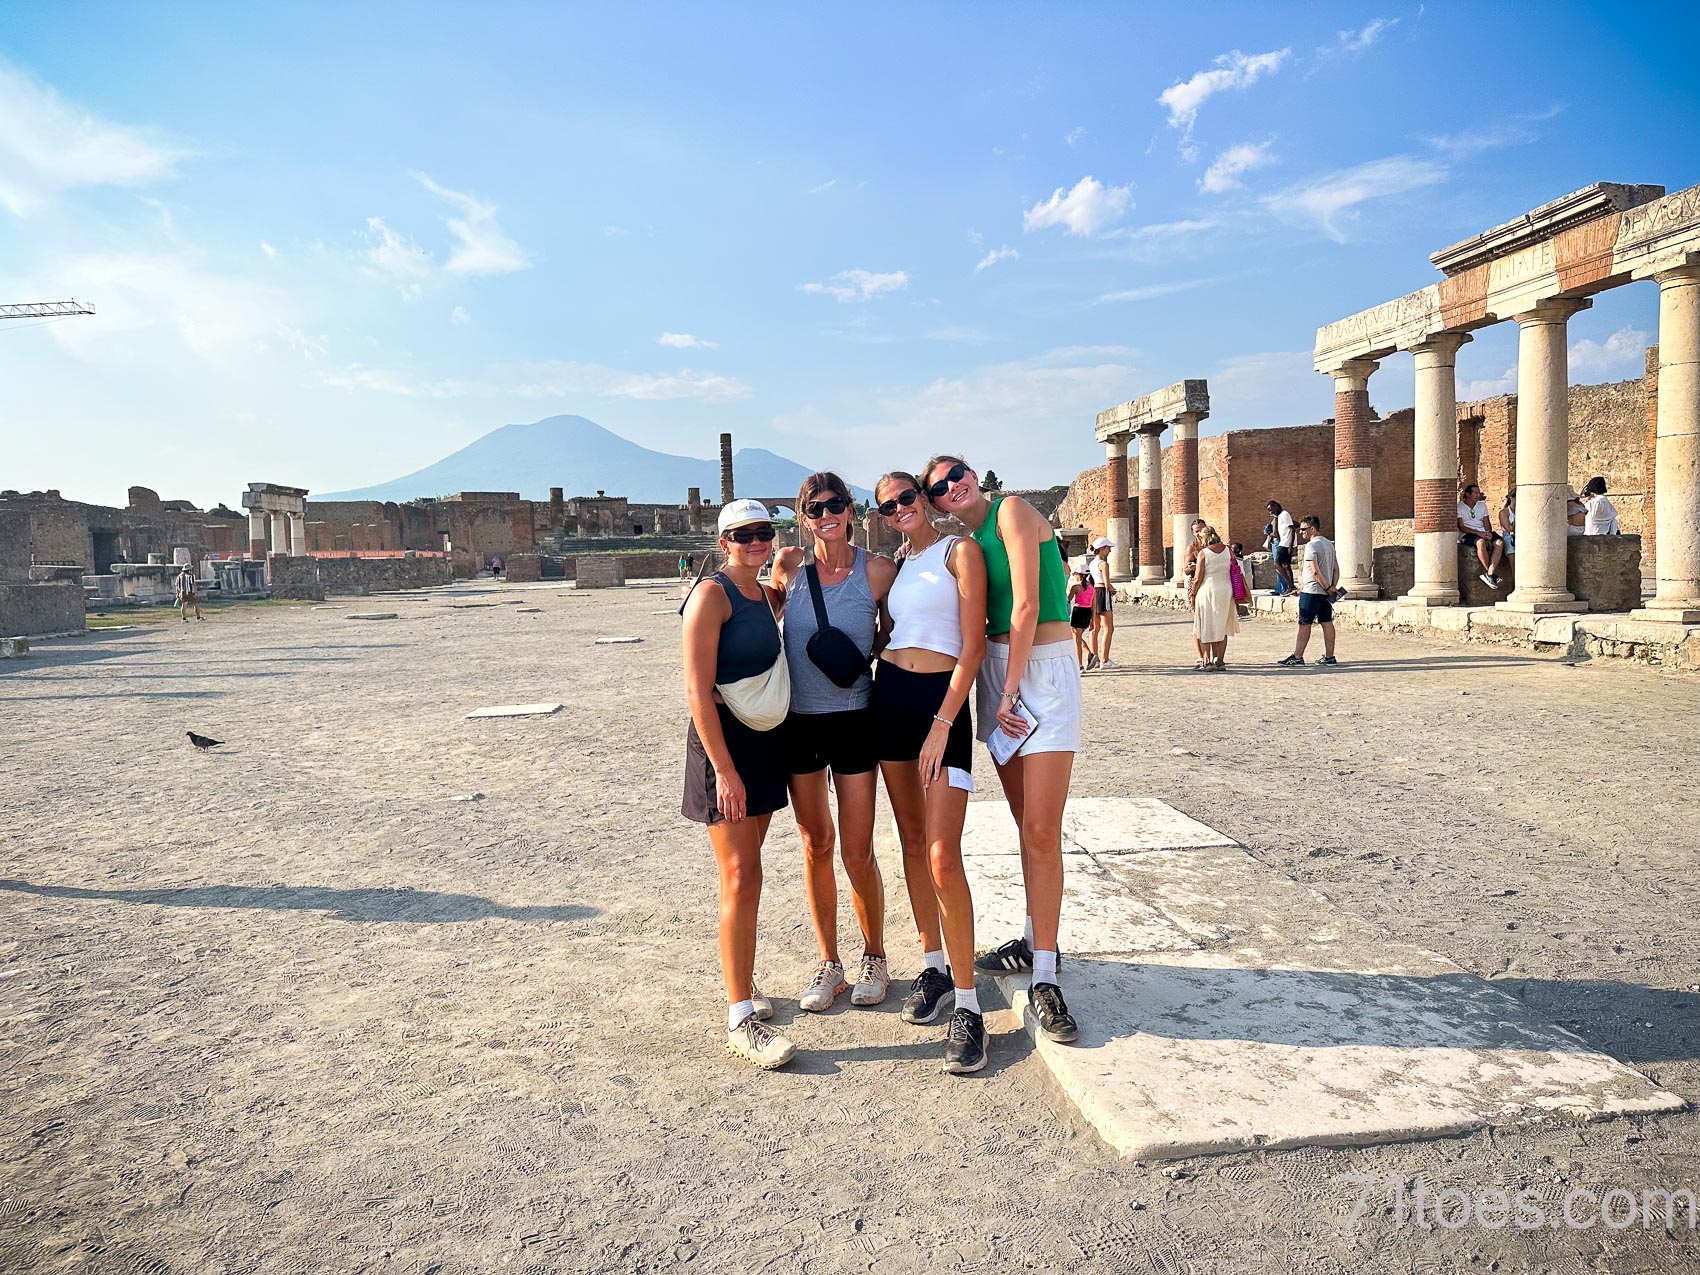 Exploring the ruins of Pompeii with the best guide!